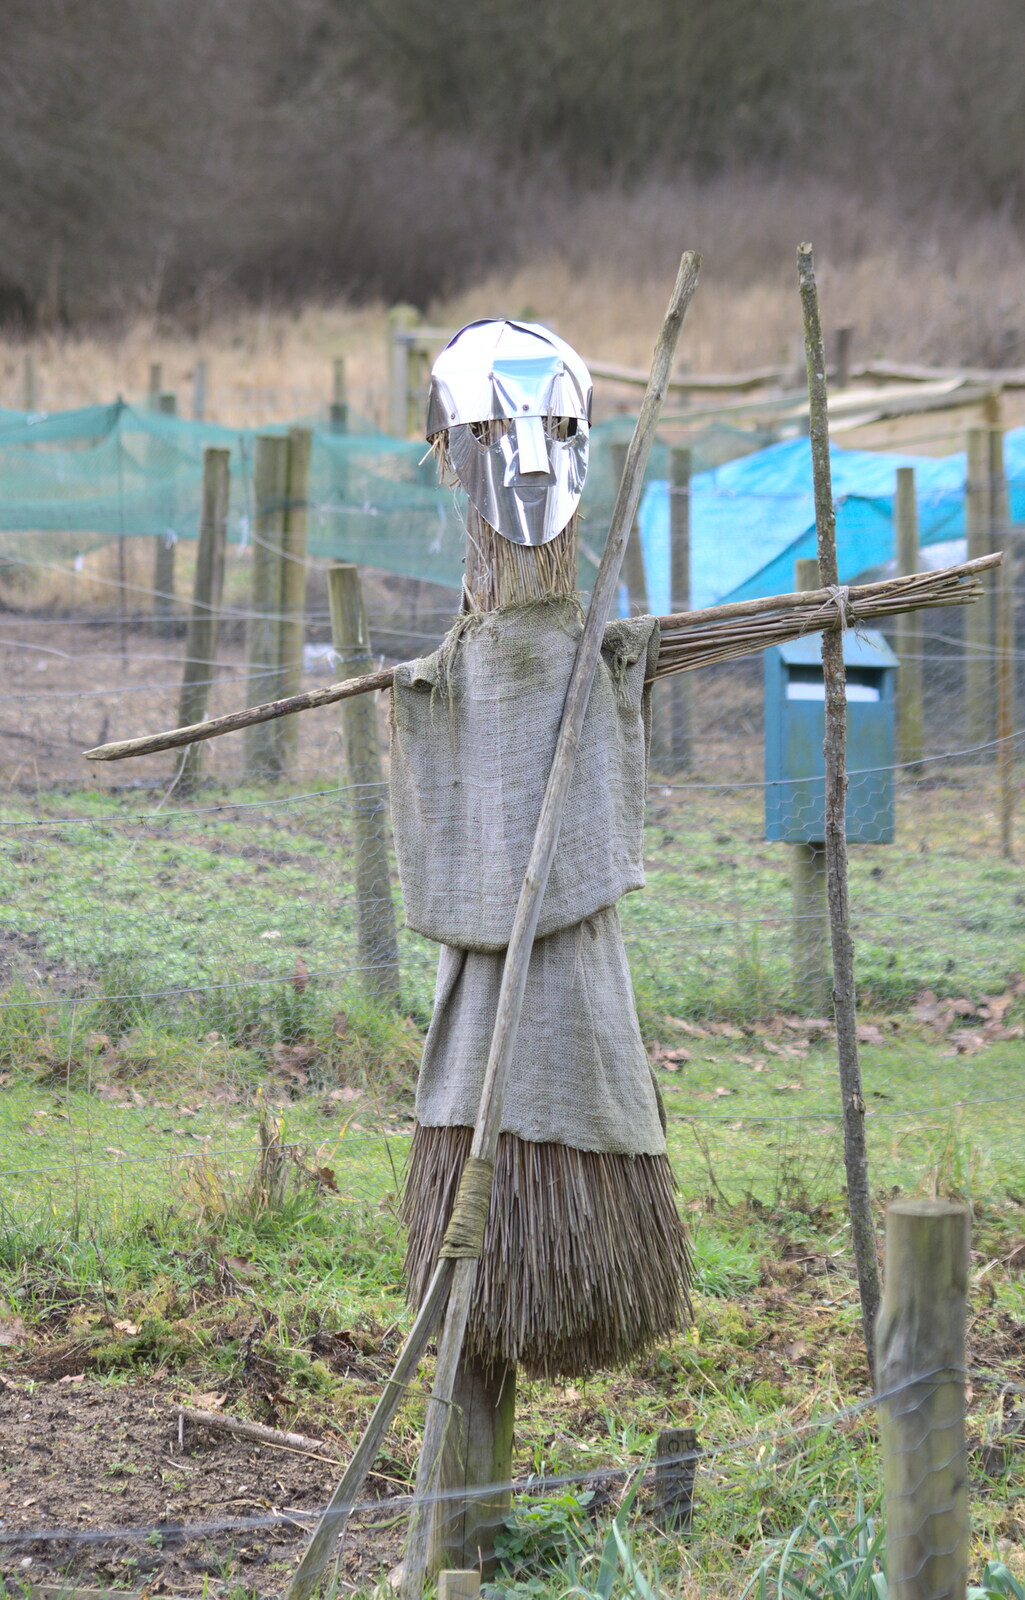 An amusing scarecrow with a Saxon helmet from An Anglo-Saxon Village, West Stow, Suffolk - 19th February 2017